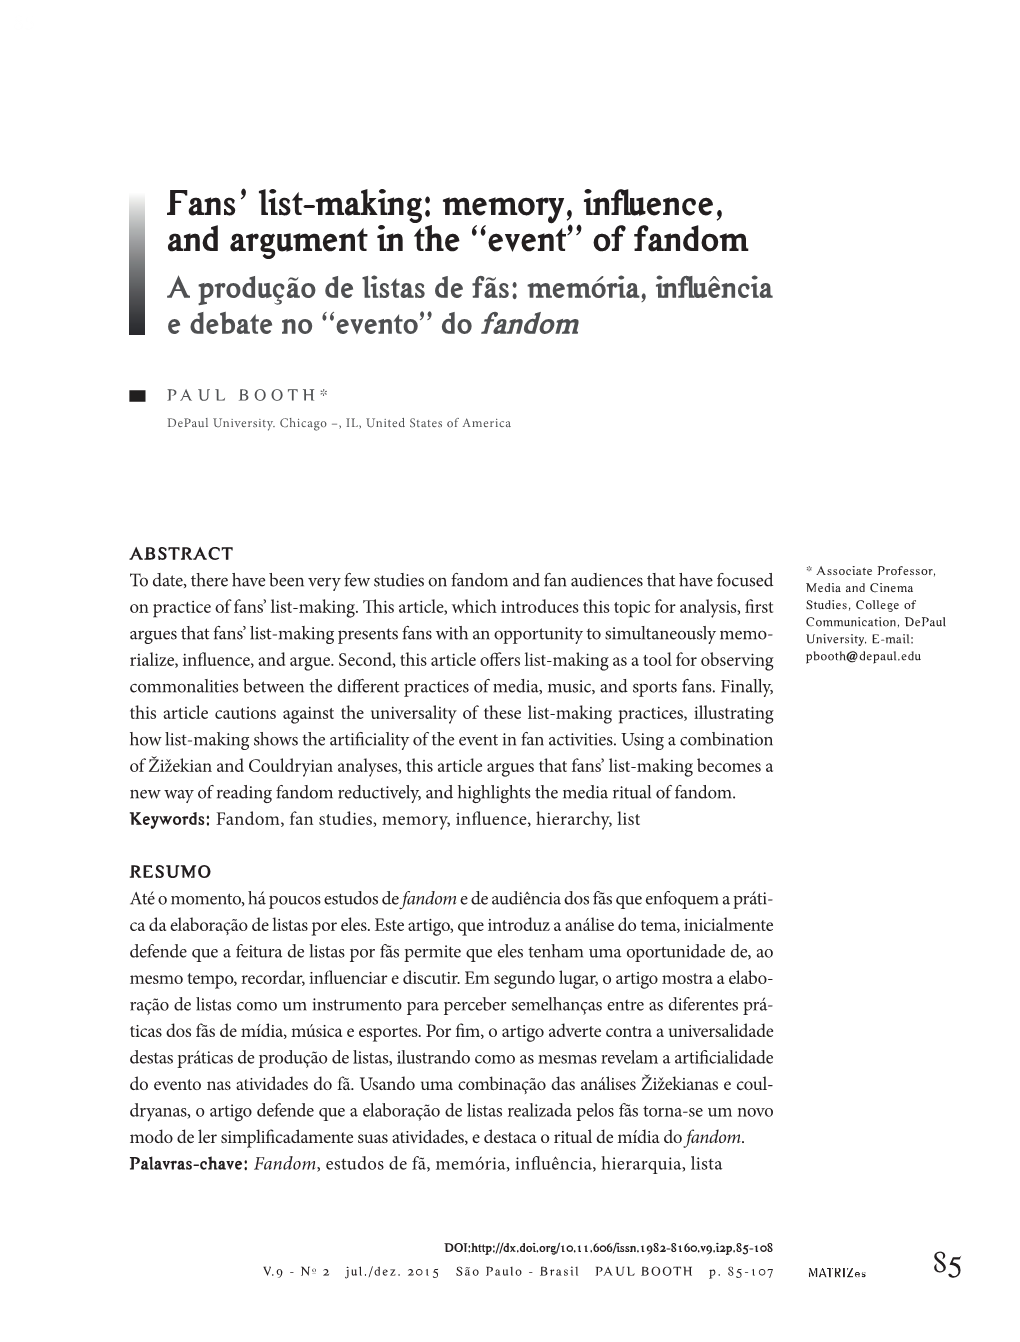 Fans' List-Making: Memory, Influence, and Argument in the “Event” of Fandom